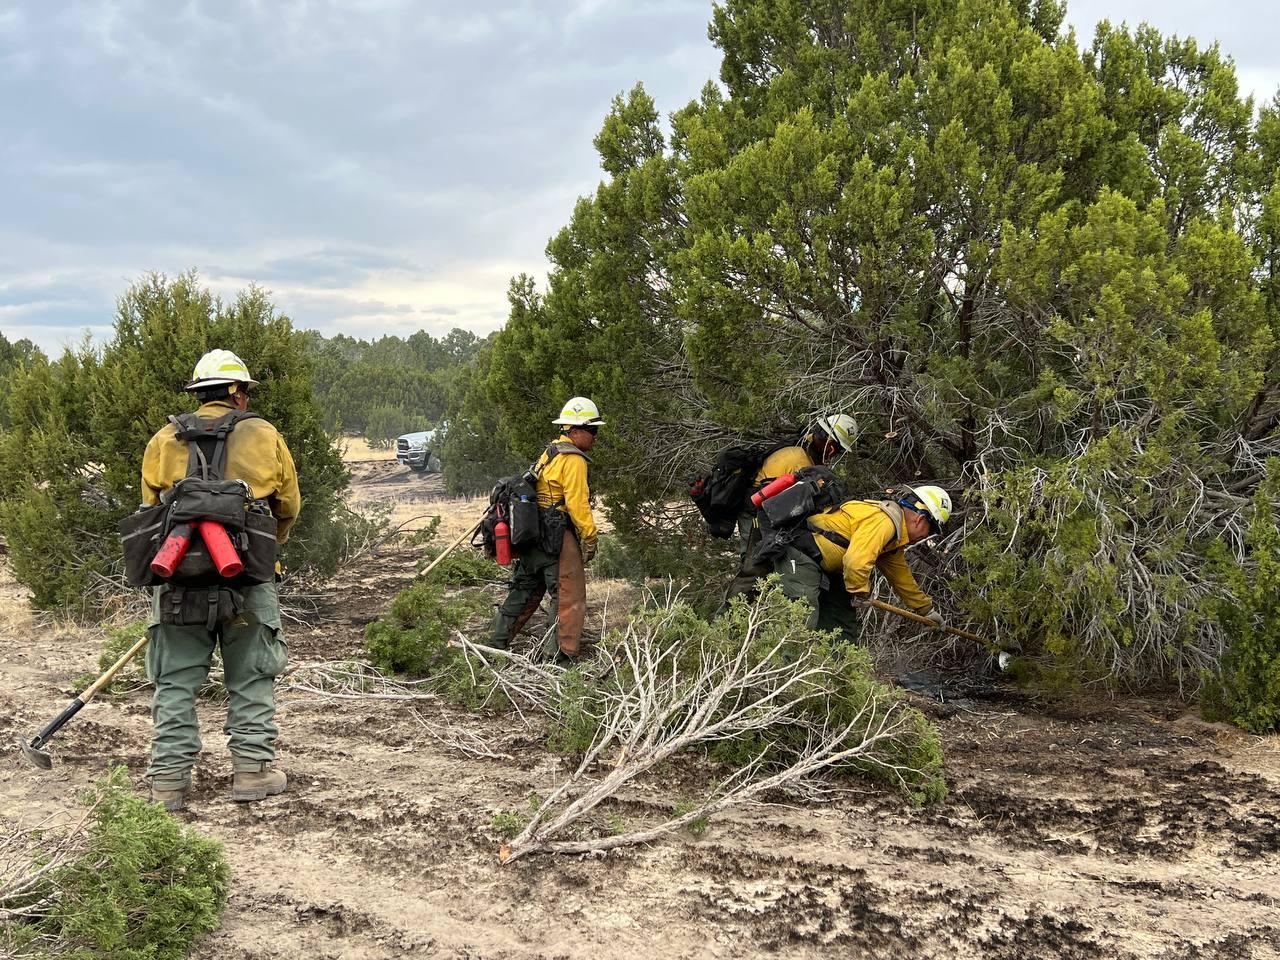 4 male firefighters work to remove vegetation. One uses a chainsaw to cut branches, one firefighter pulls cut branches to the side, two firefighters use tools to stir dirt and extinguish heat.